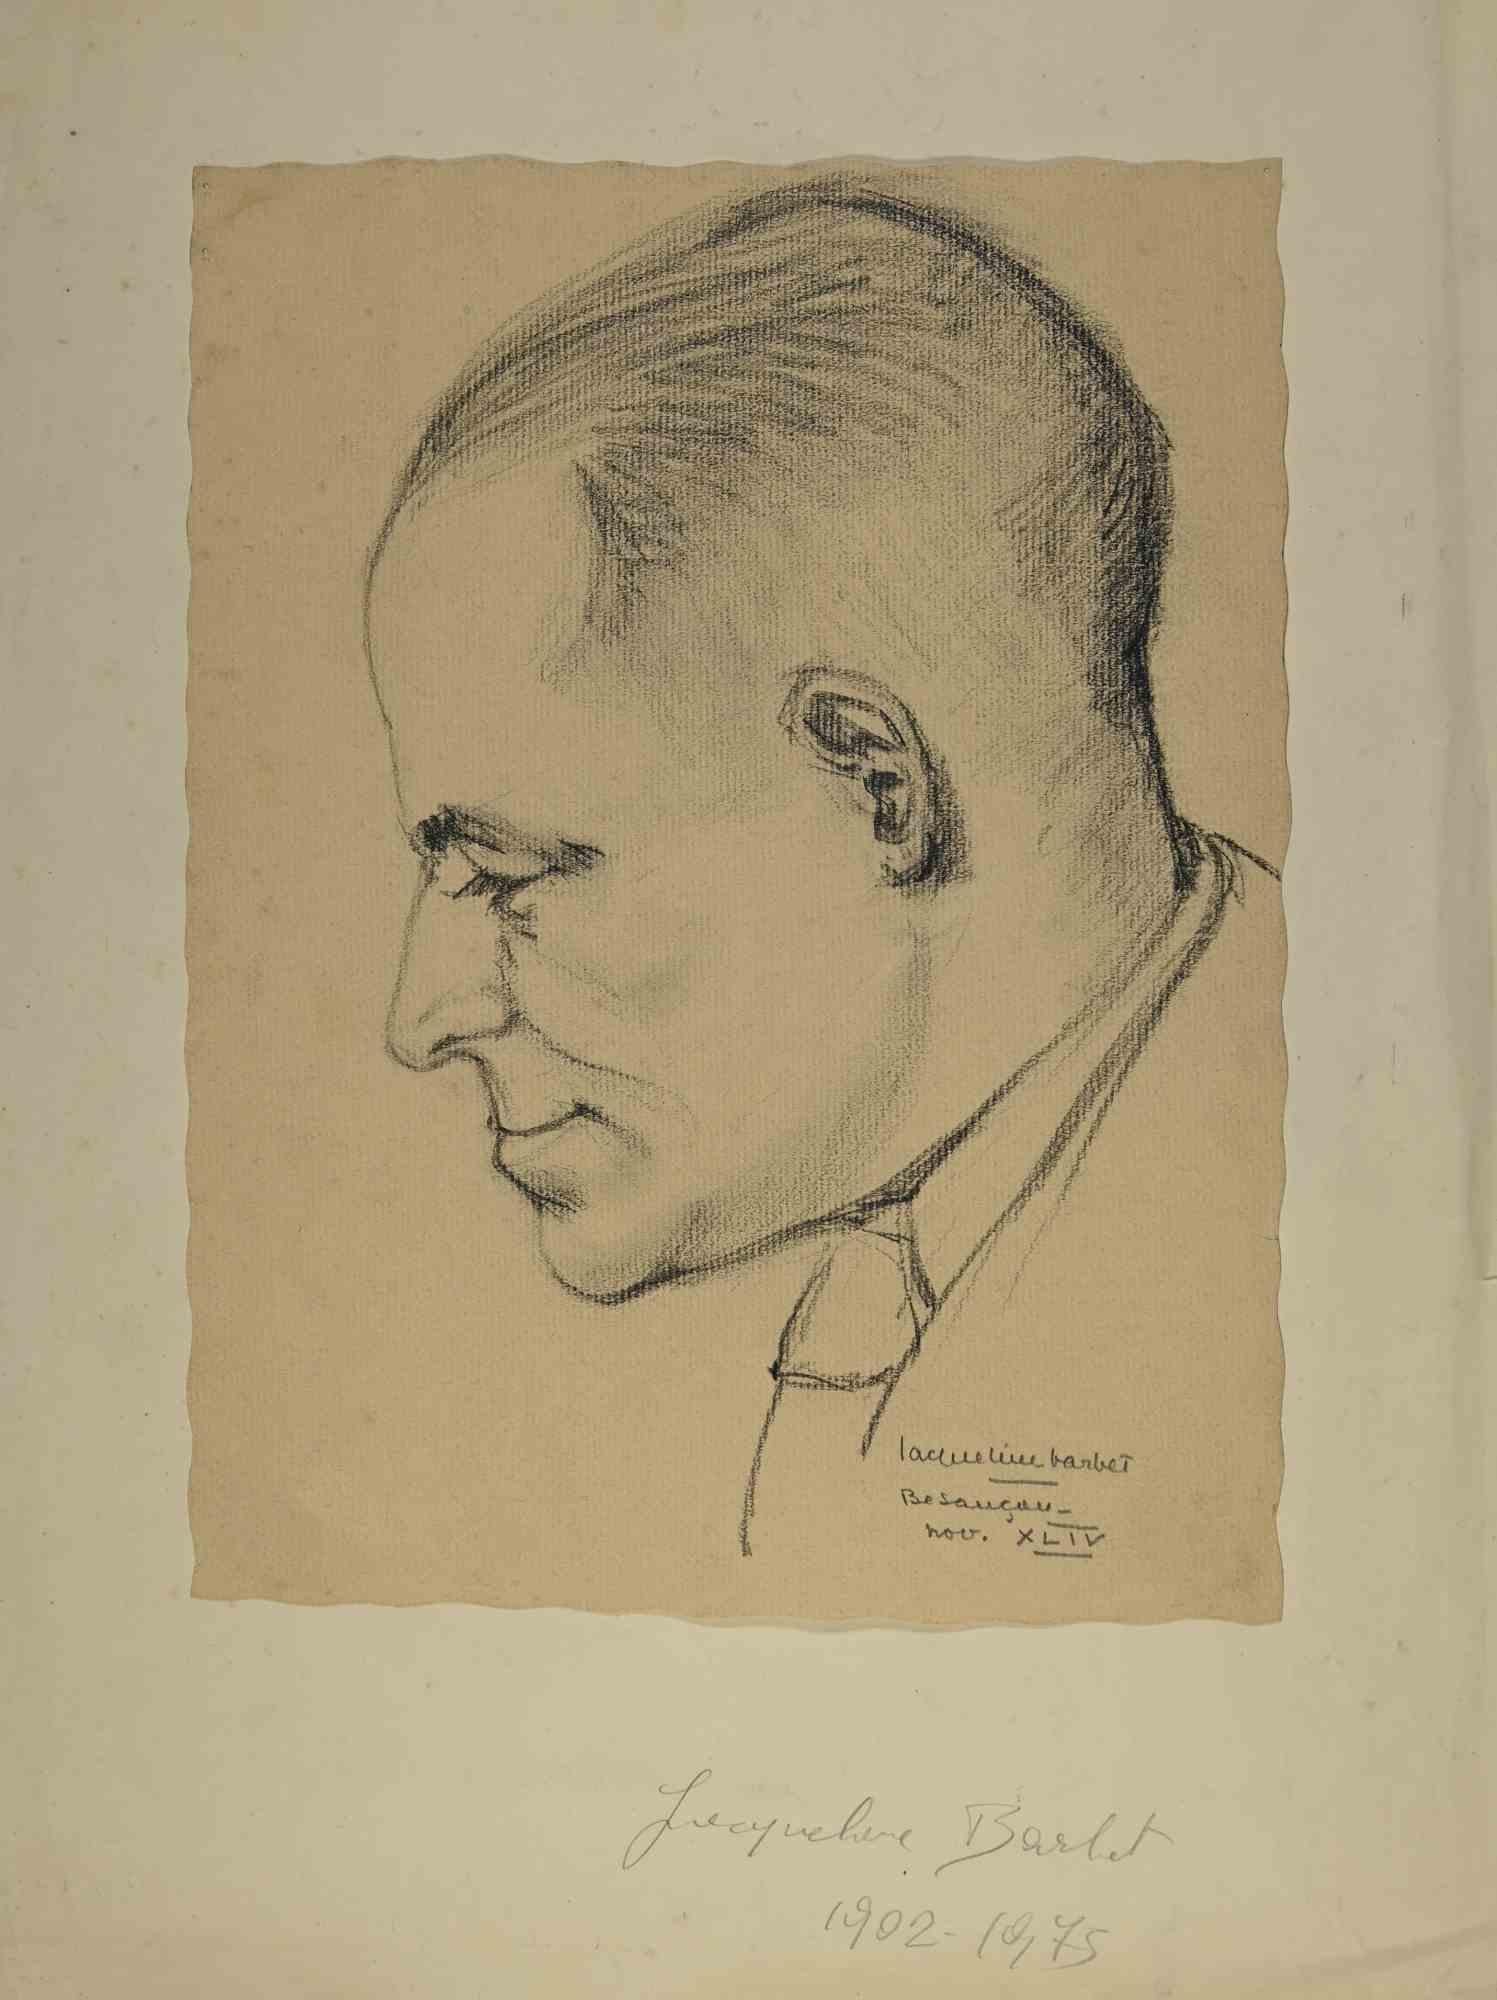 Portrait of a Man - Drawing by Jacqueline Barbet - 1944